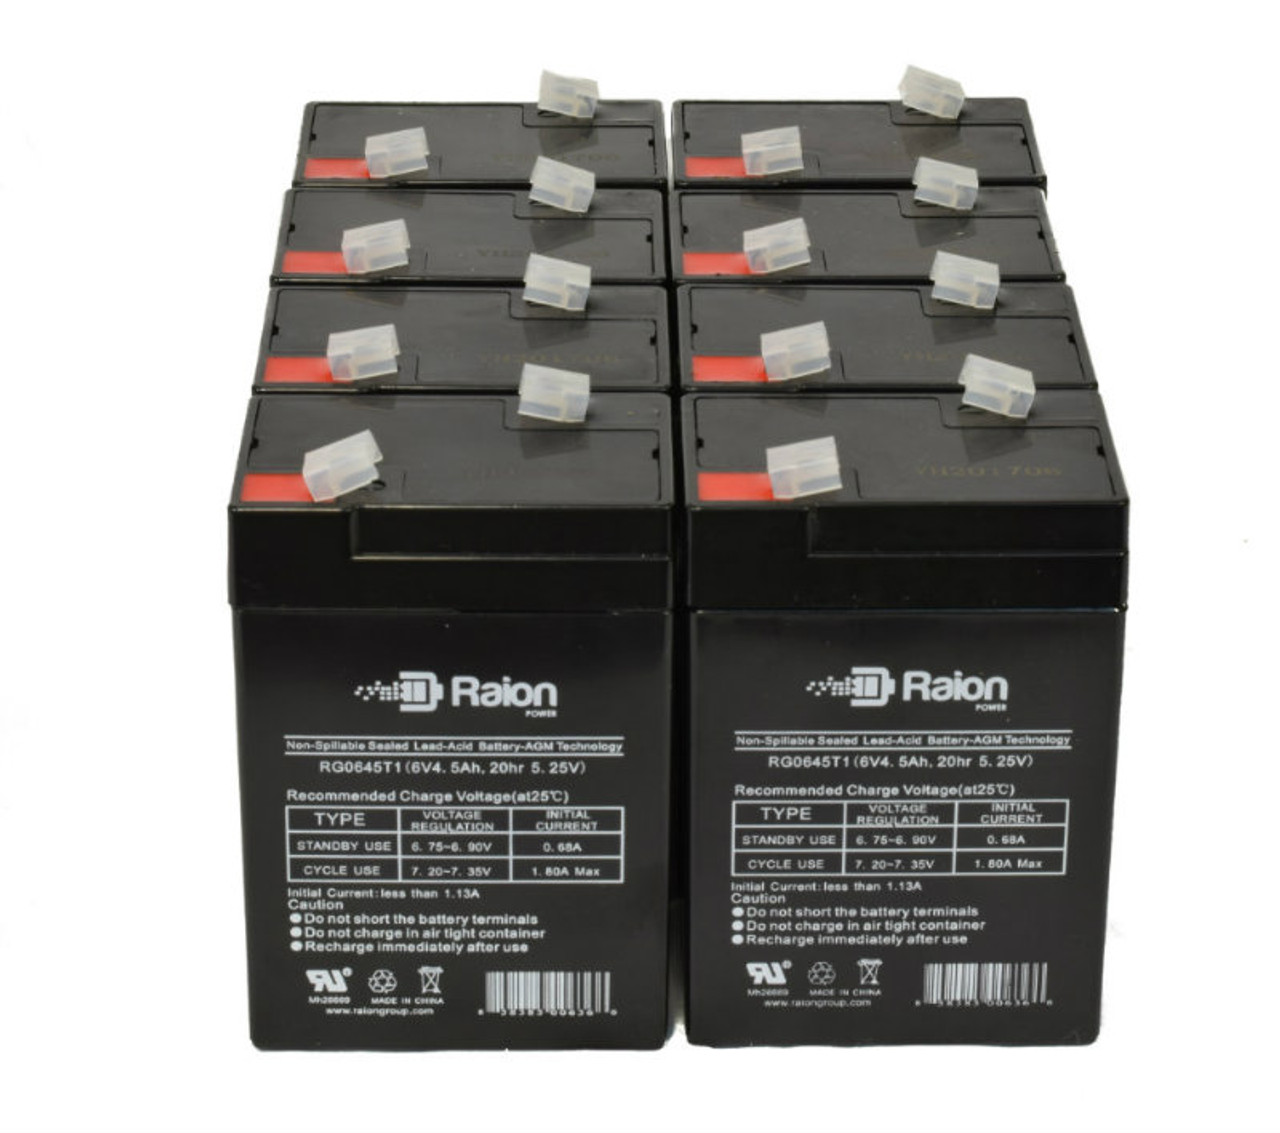 Raion Power RG0645T1 6V 4.5Ah Replacement Medical Equipment Battery for Mcgaw 521 Plus - 8 Pack